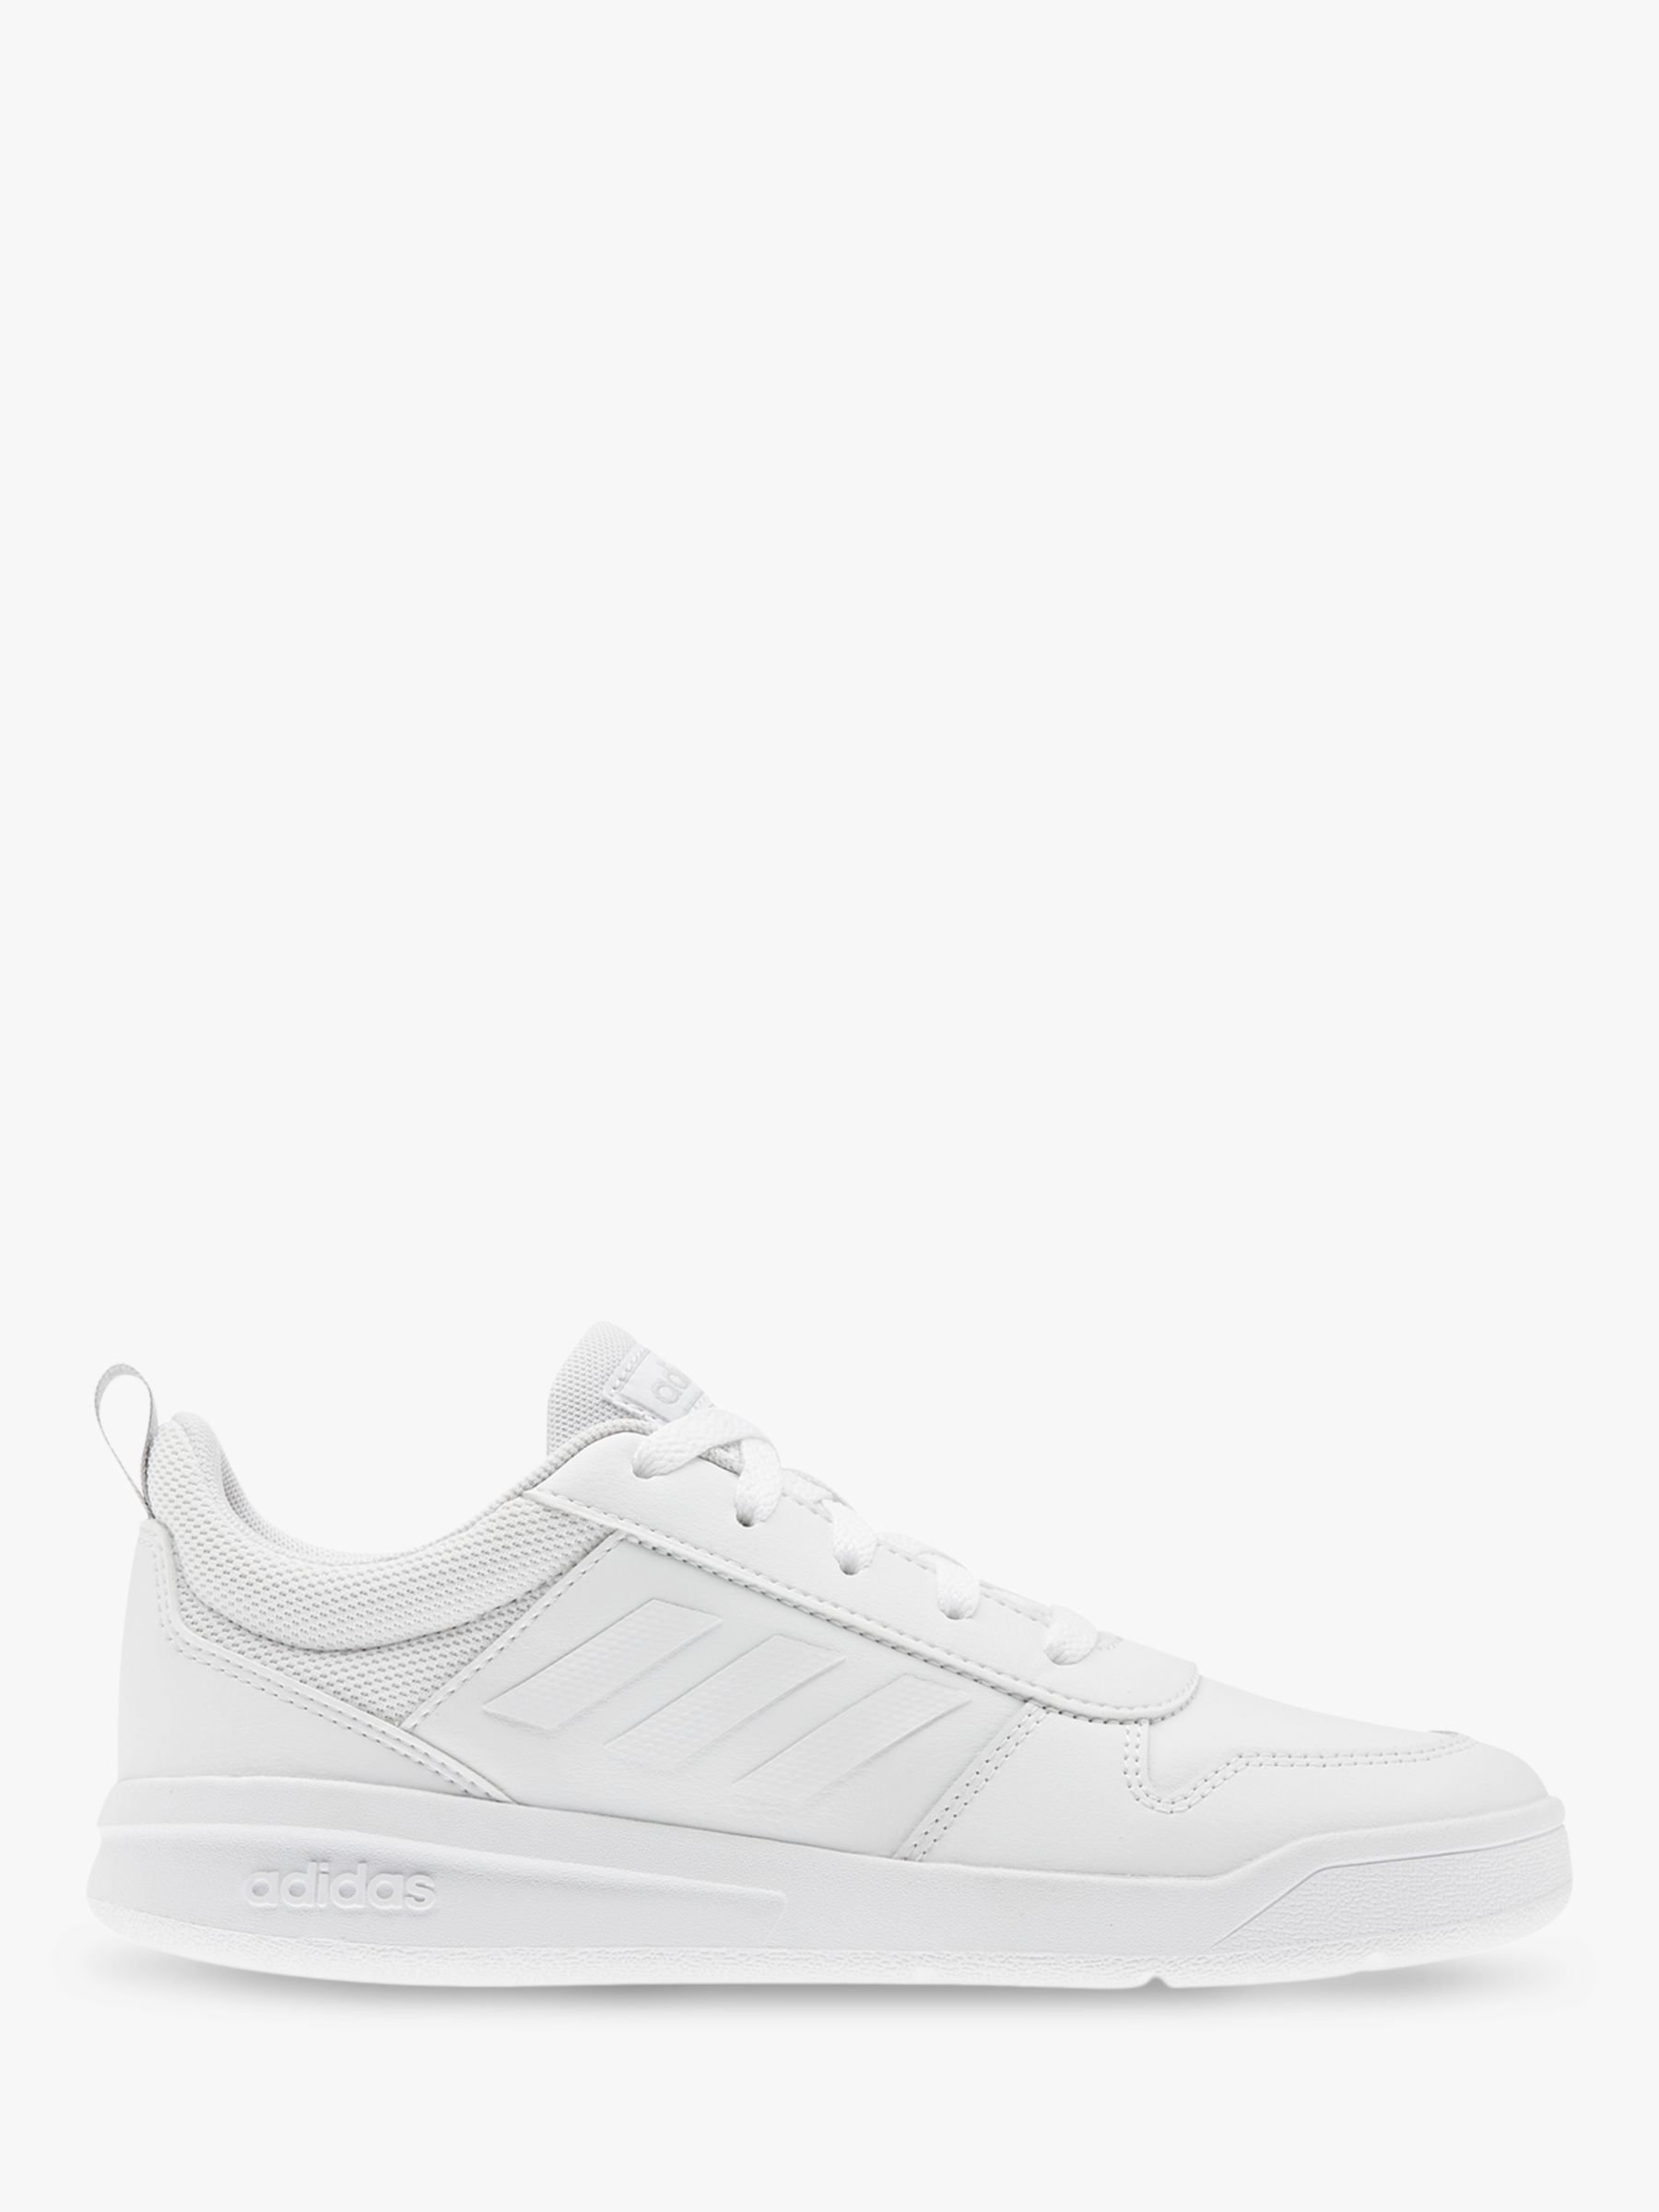 adidas Kids' Tensaur Trainers, FTWR White/Grey Two at John Lewis & Partners